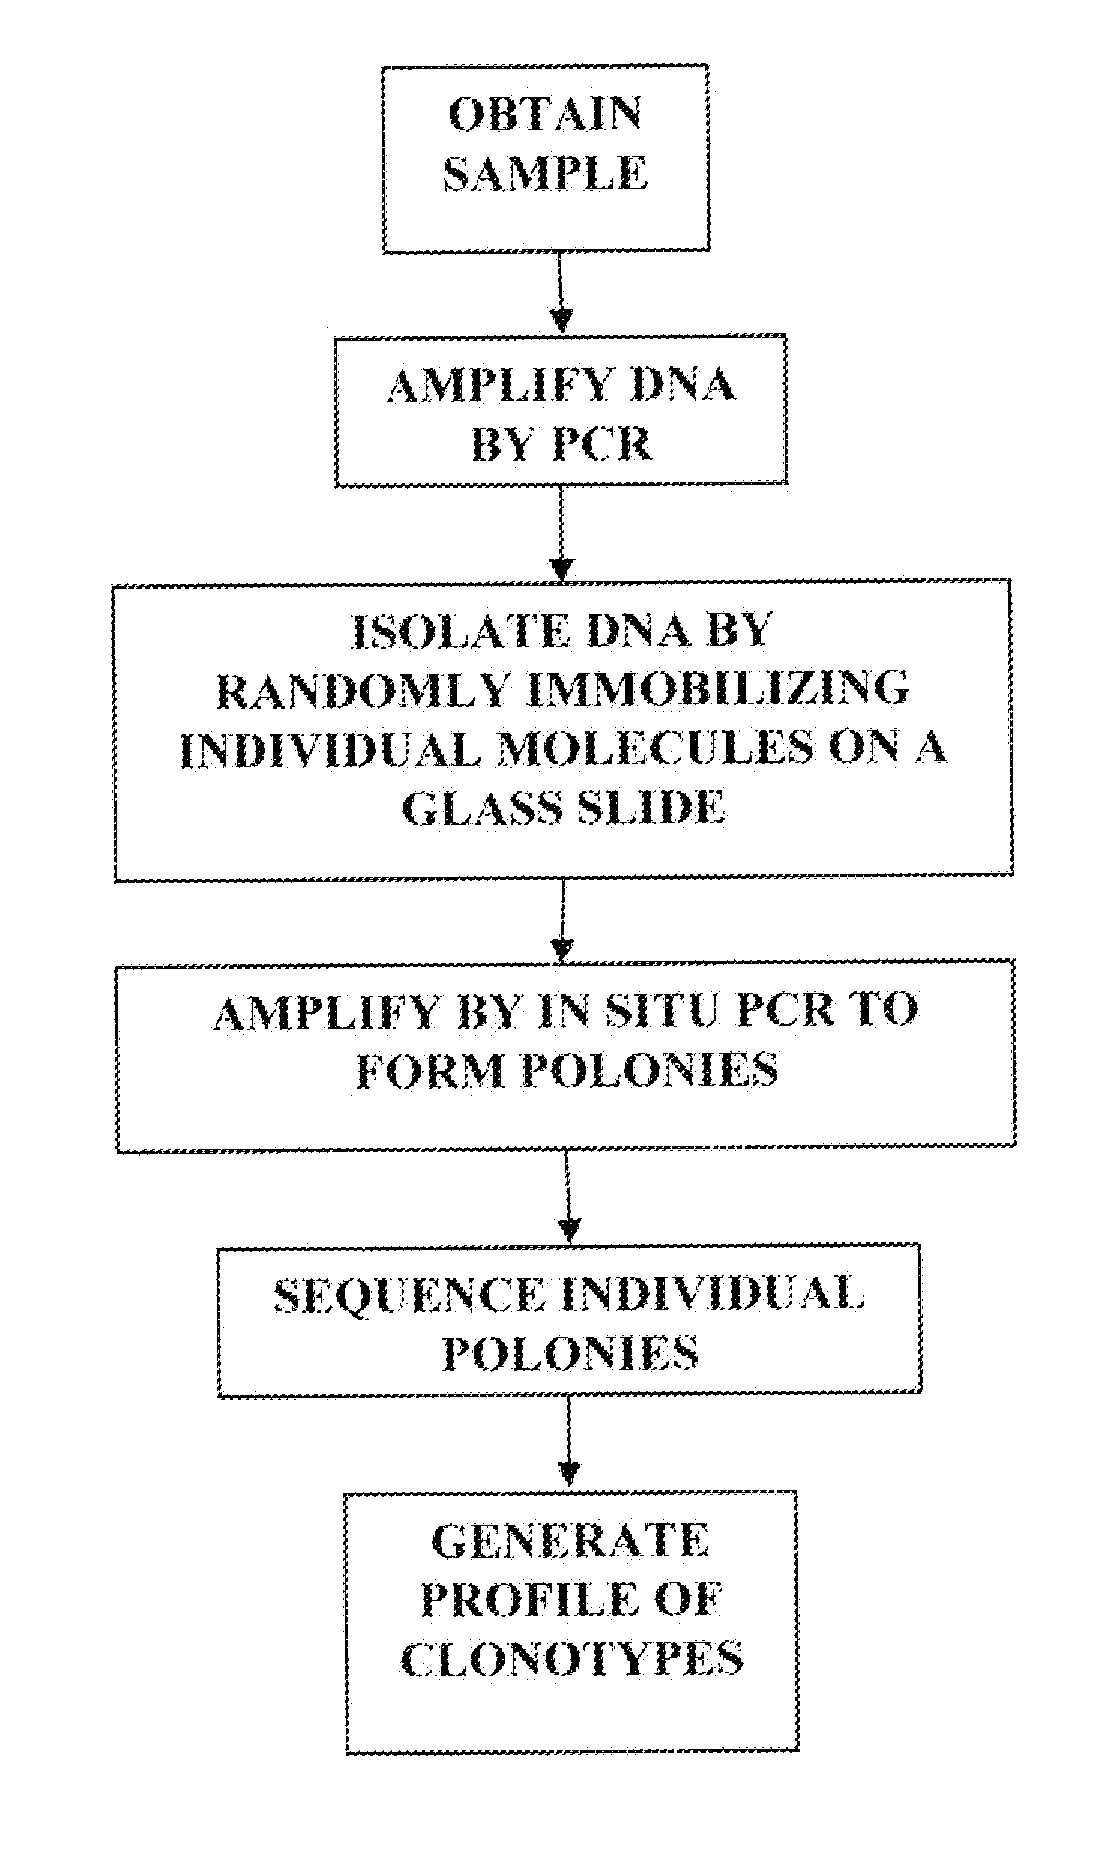 Methods of monitoring conditions by sequence analysis